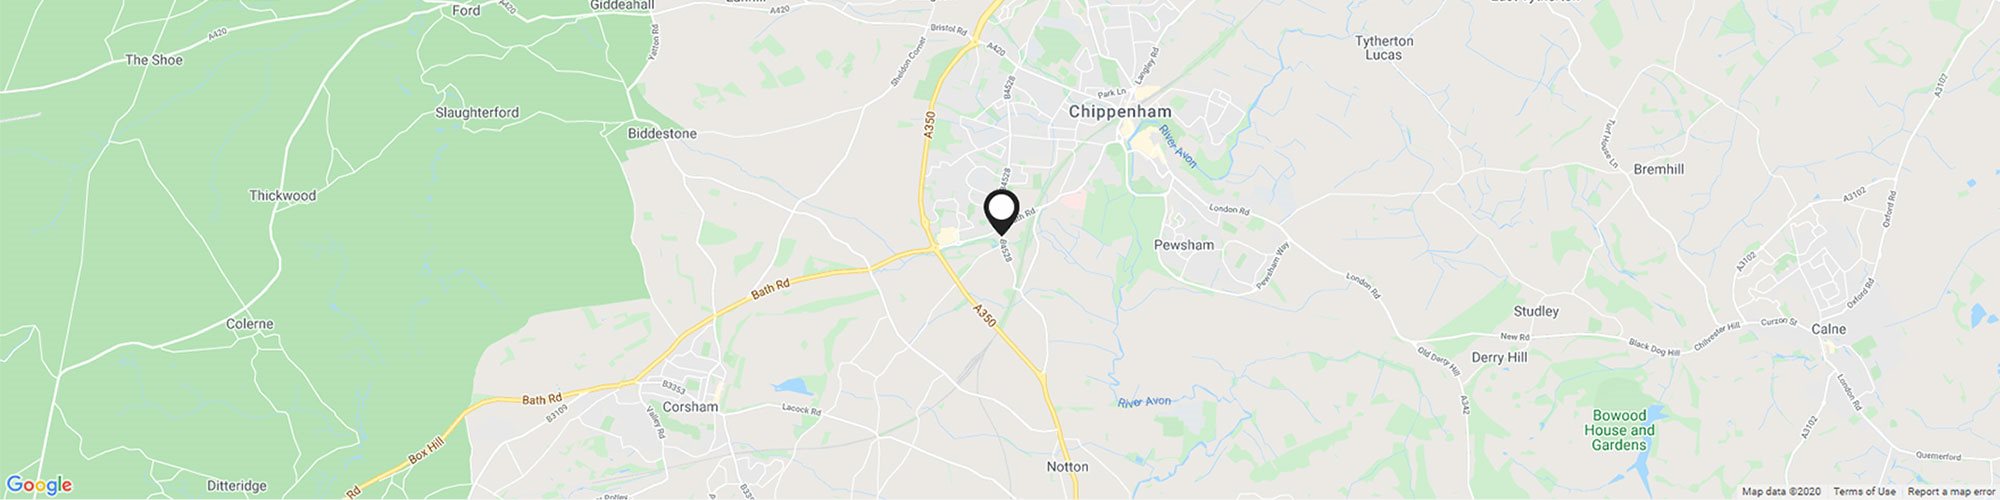 Close up map showing specific Bath Road Chippenham Motor Company location